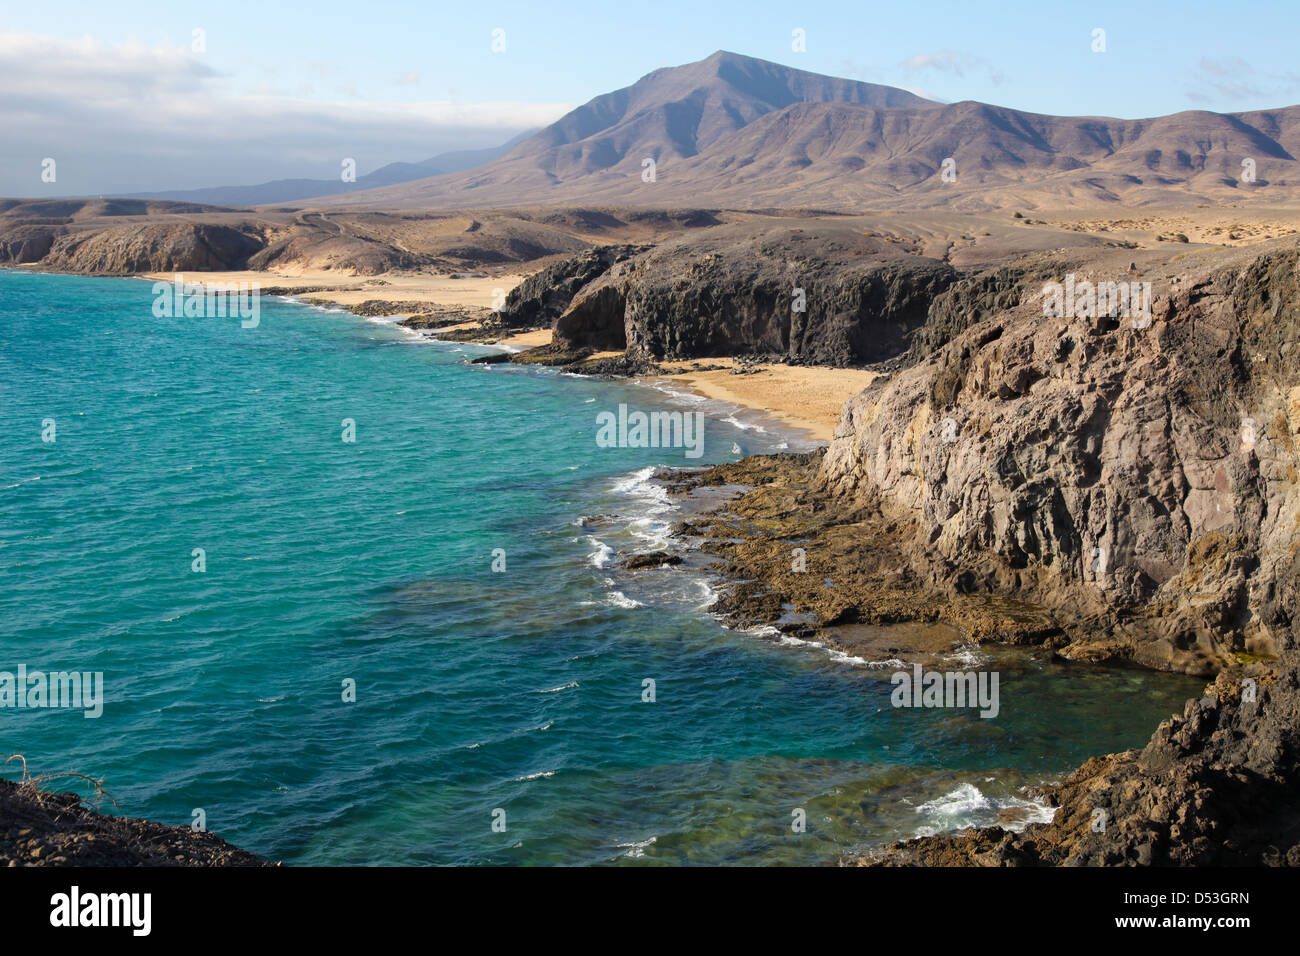 Beach and bay, Lanzarote, Spain - View of a beautiful bay and beach at the Playas de Papagayo, Lanzarote, Canary Islands, Spain. Stock Photo